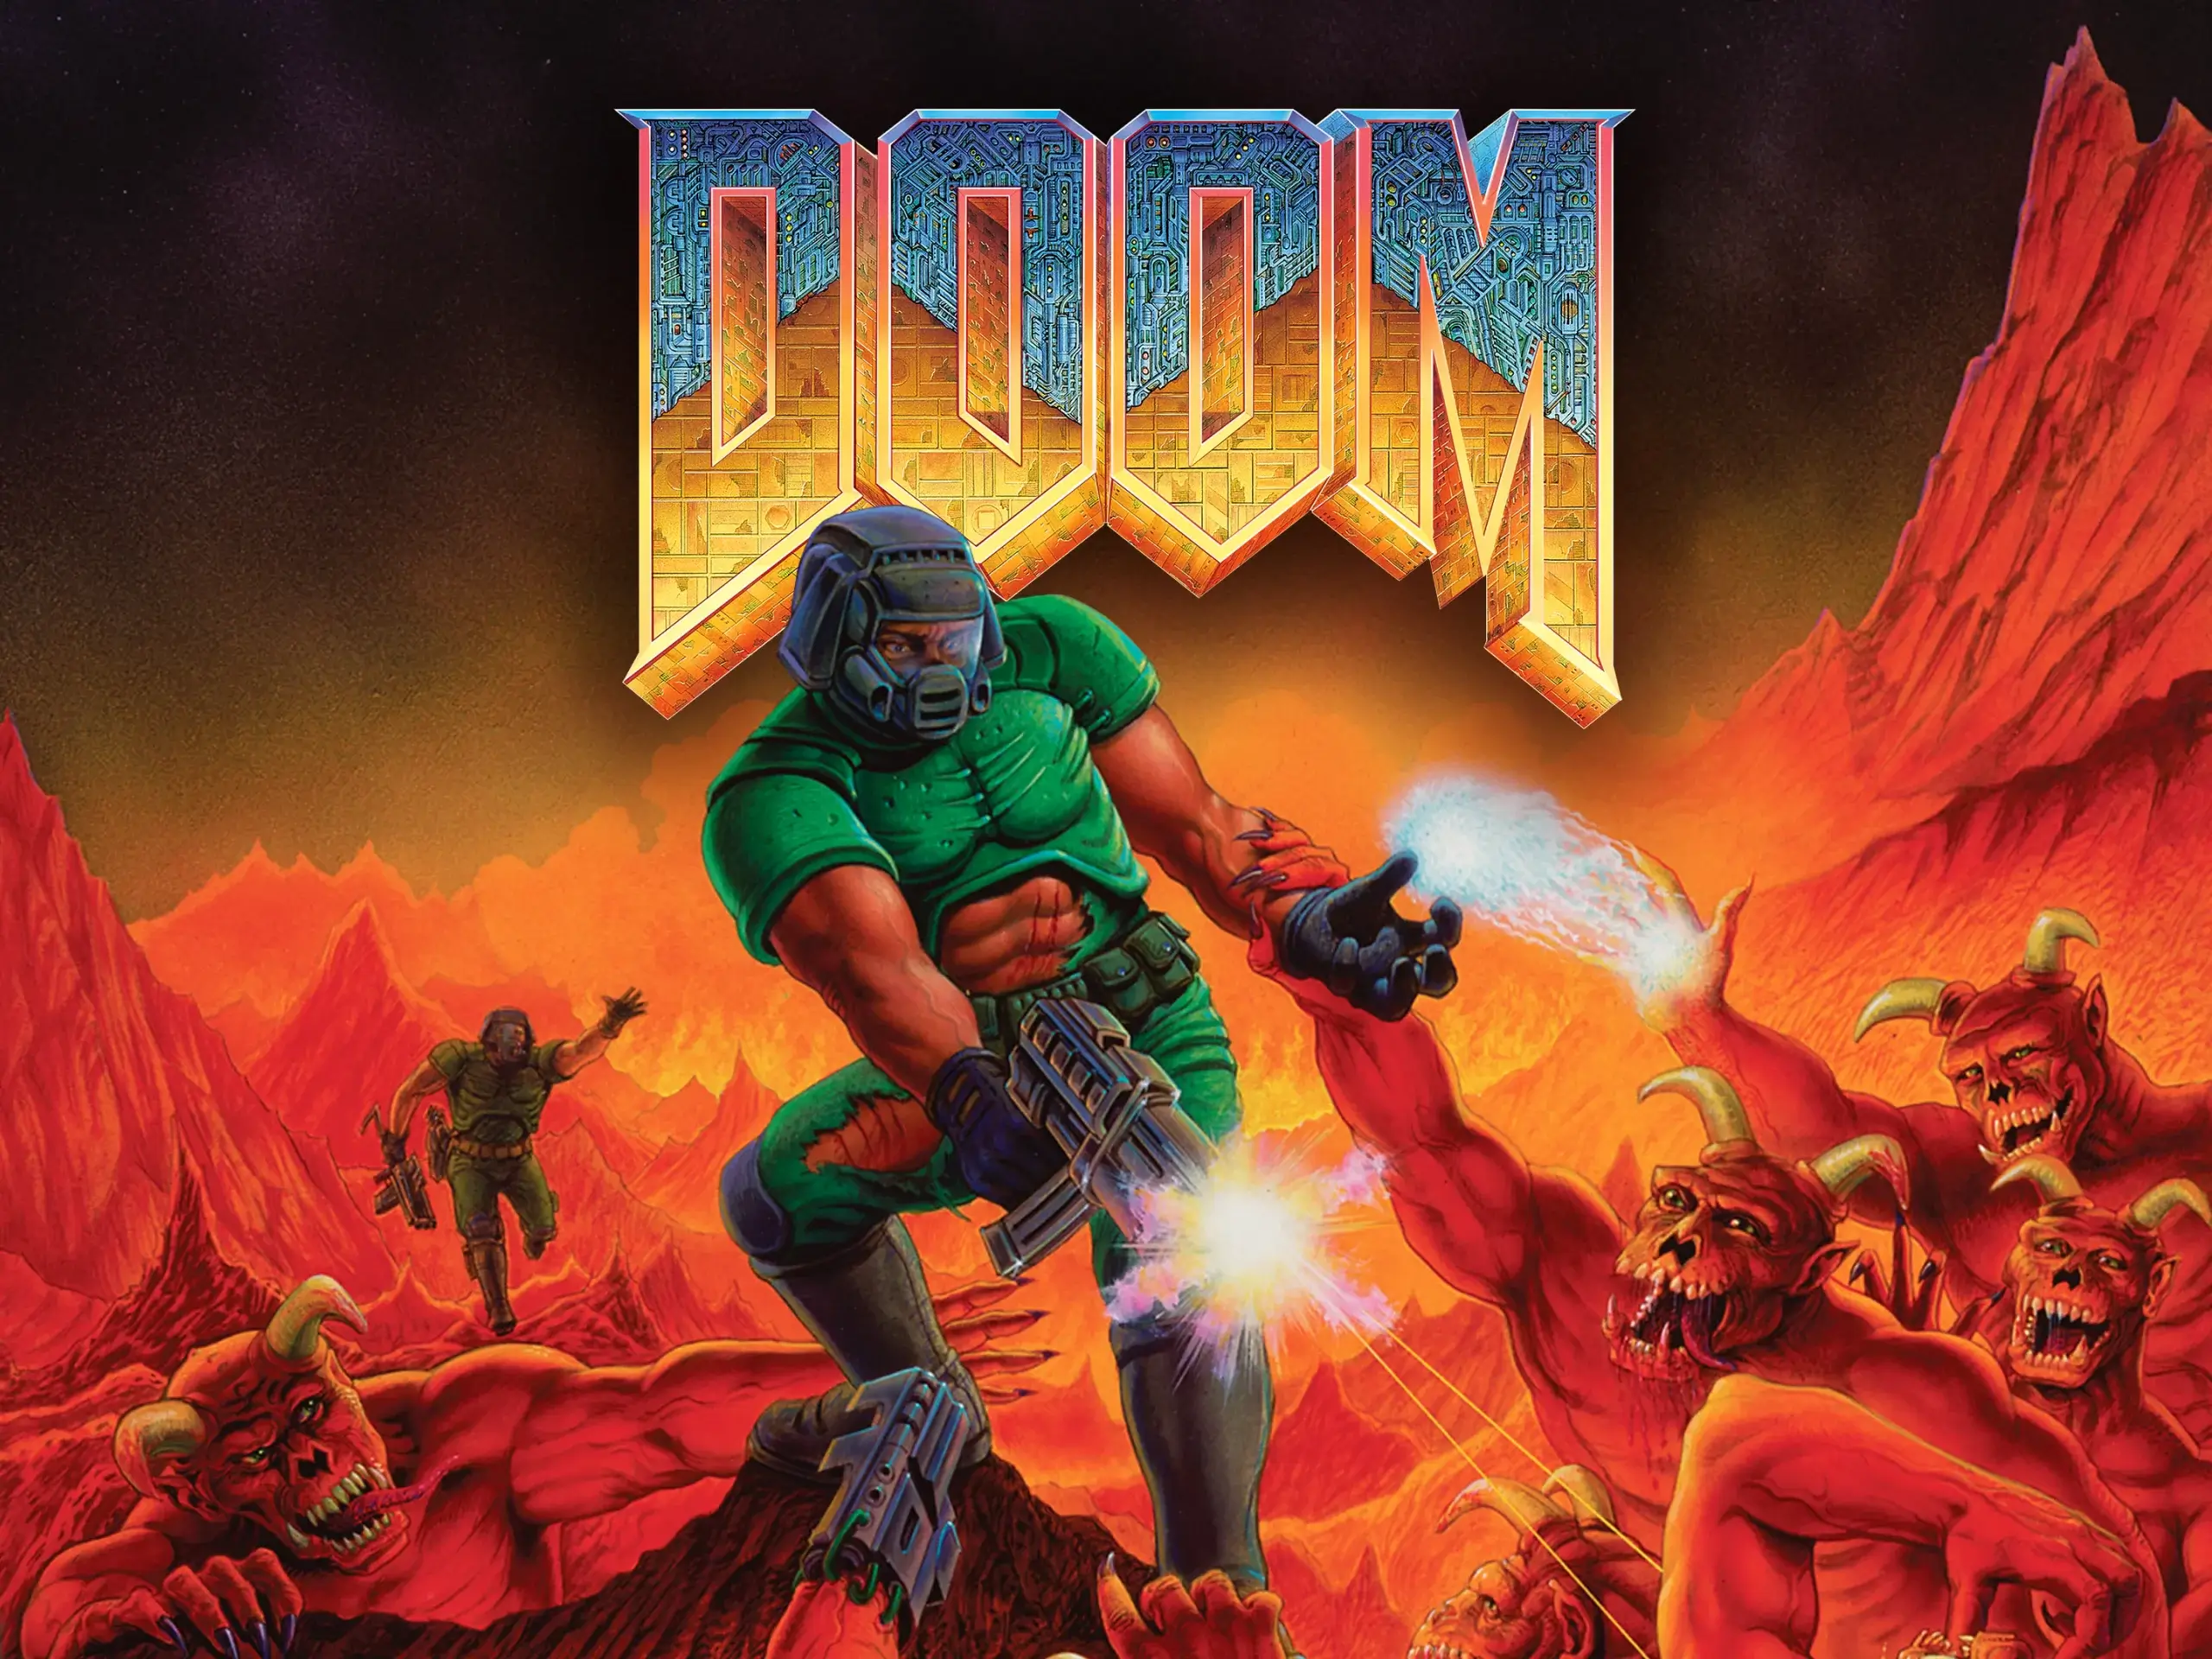 the artwork for 90's classic videogame Doom is which a soldier wearing a helmet and green armor fights off demons with a machine gun as they grab at him from the depths of hell.